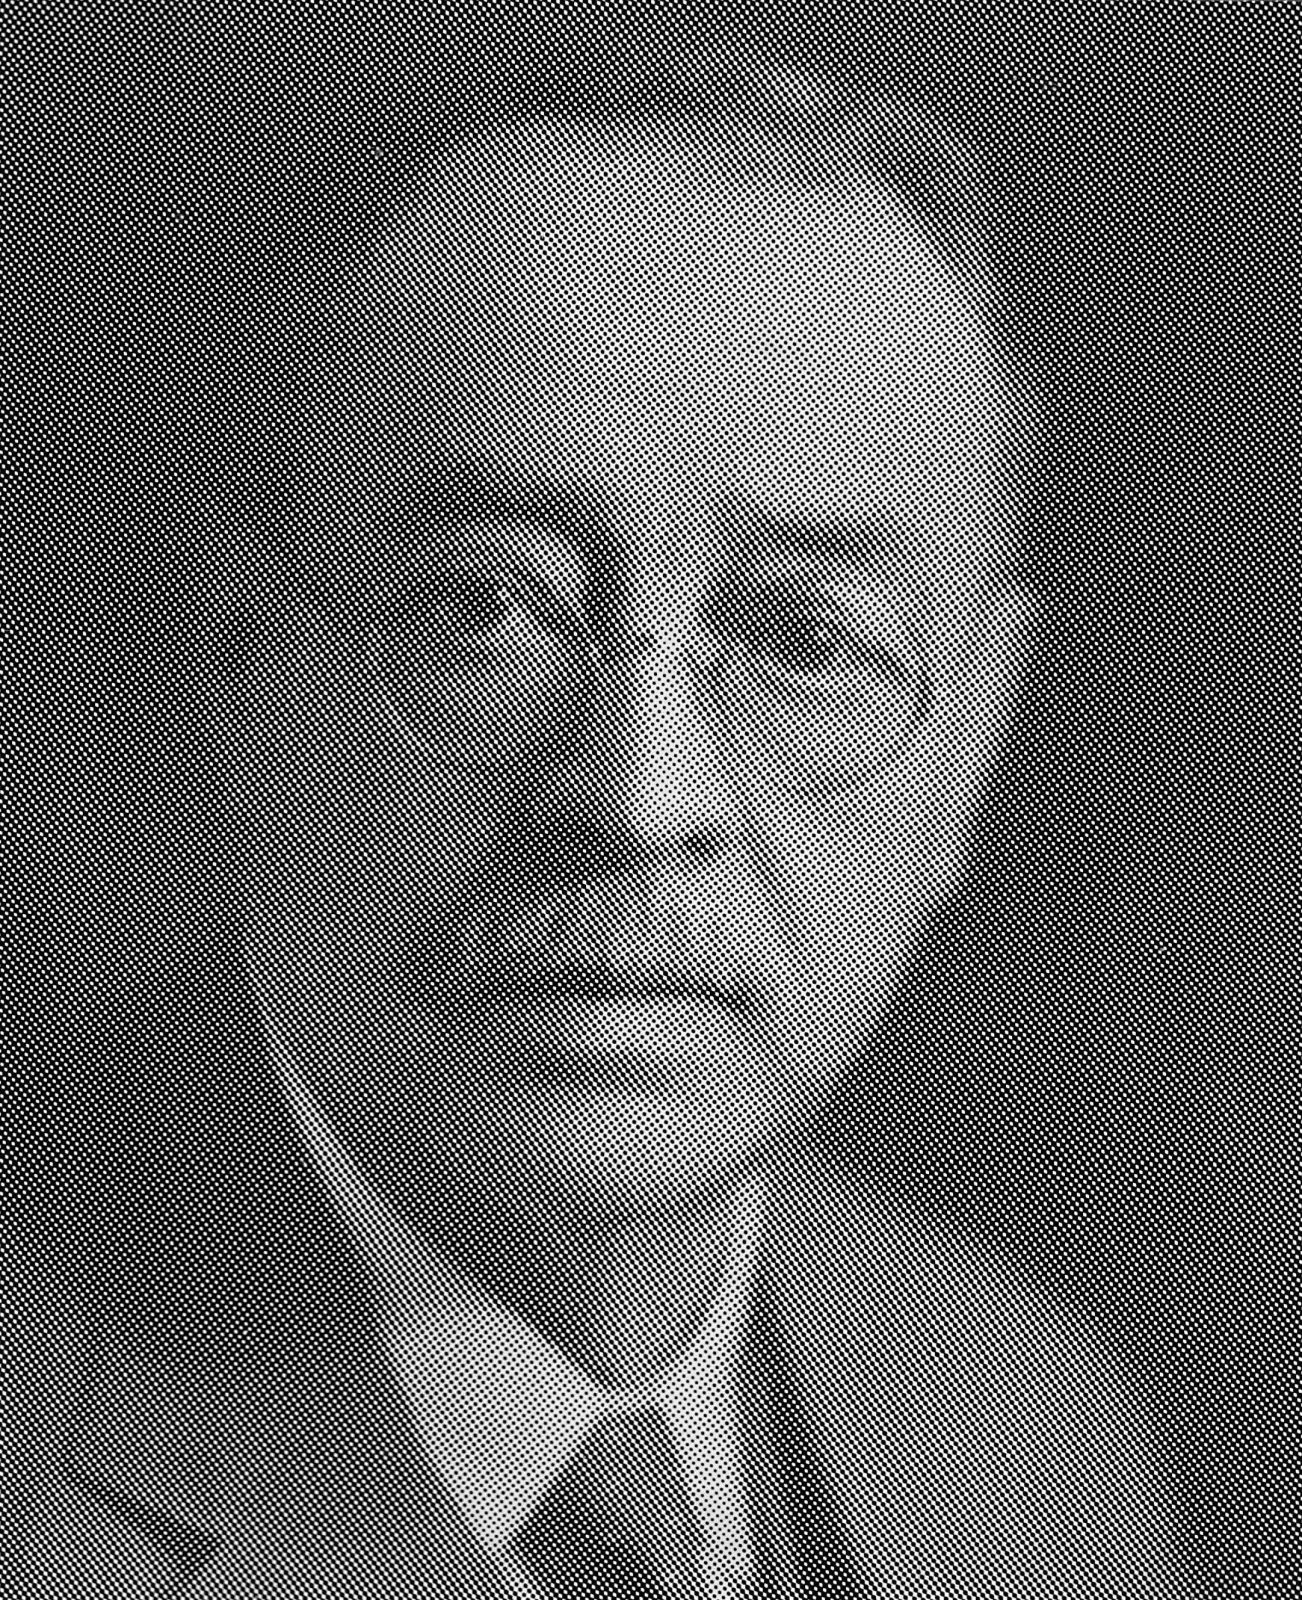 William Wright (1865-1938):  Owner of the Sherbrooke House and  the New Sherbrooke Hotel